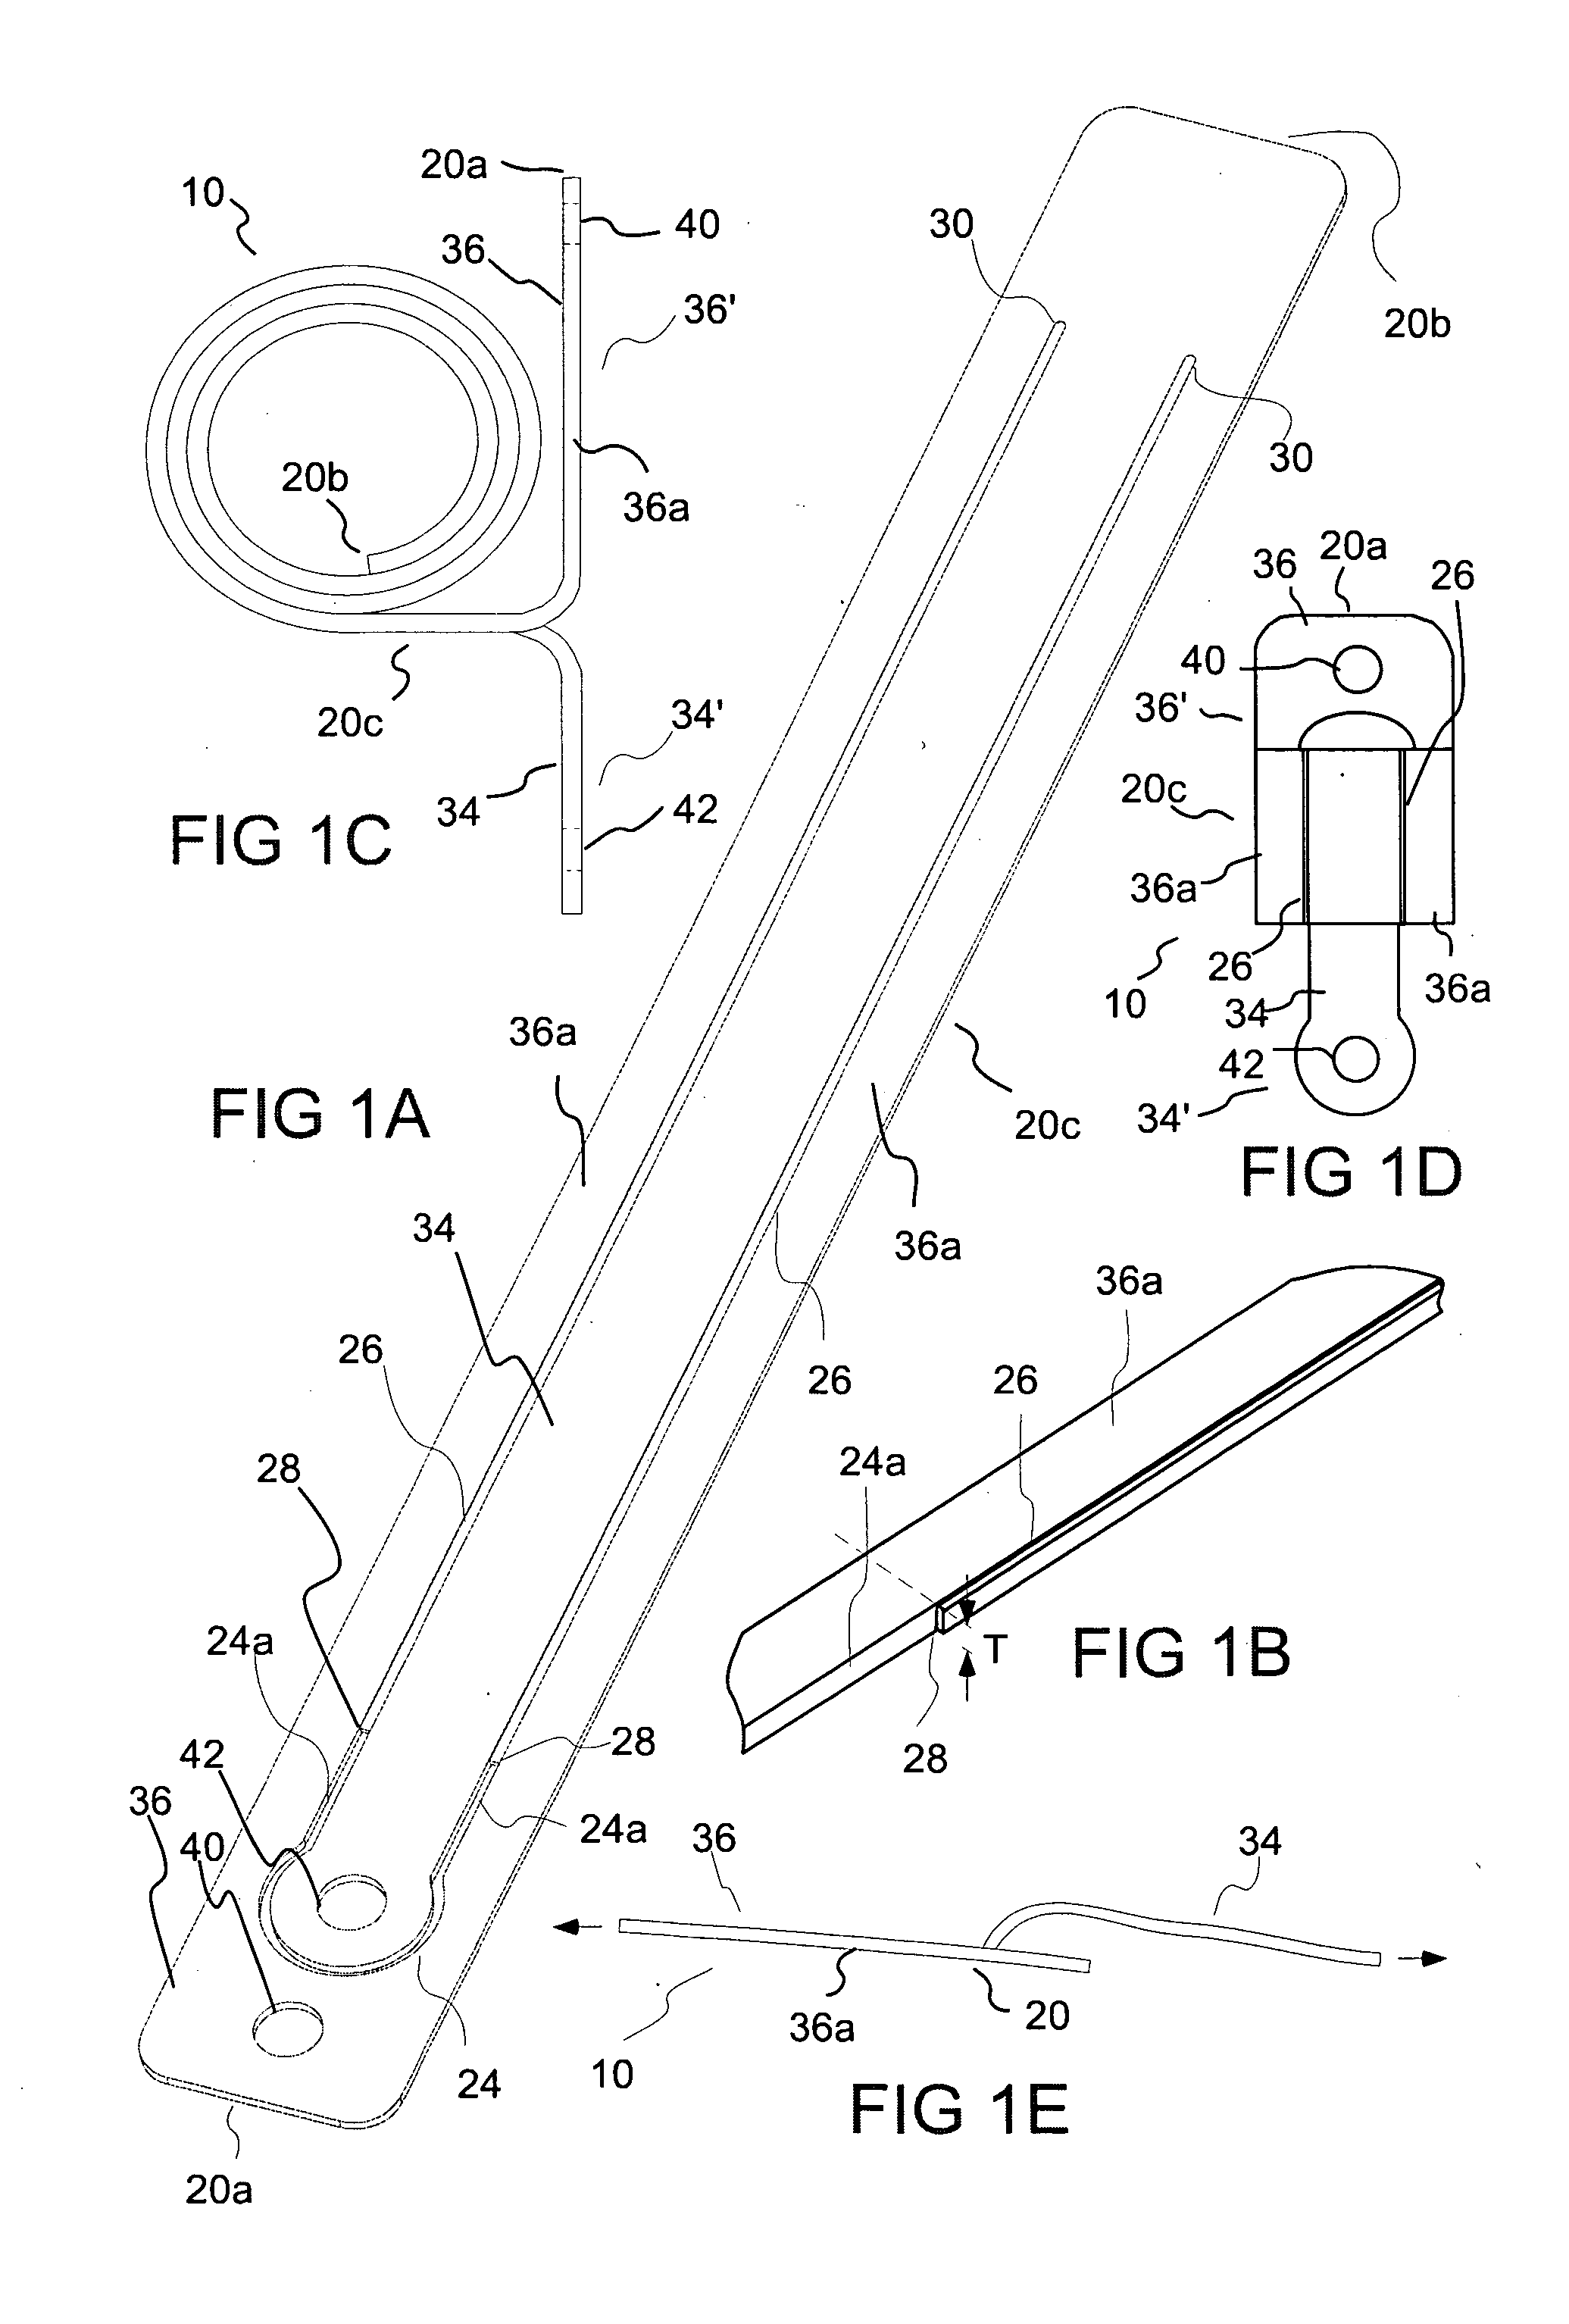 Energy absorbers, connectors and horizontal lifeline systems